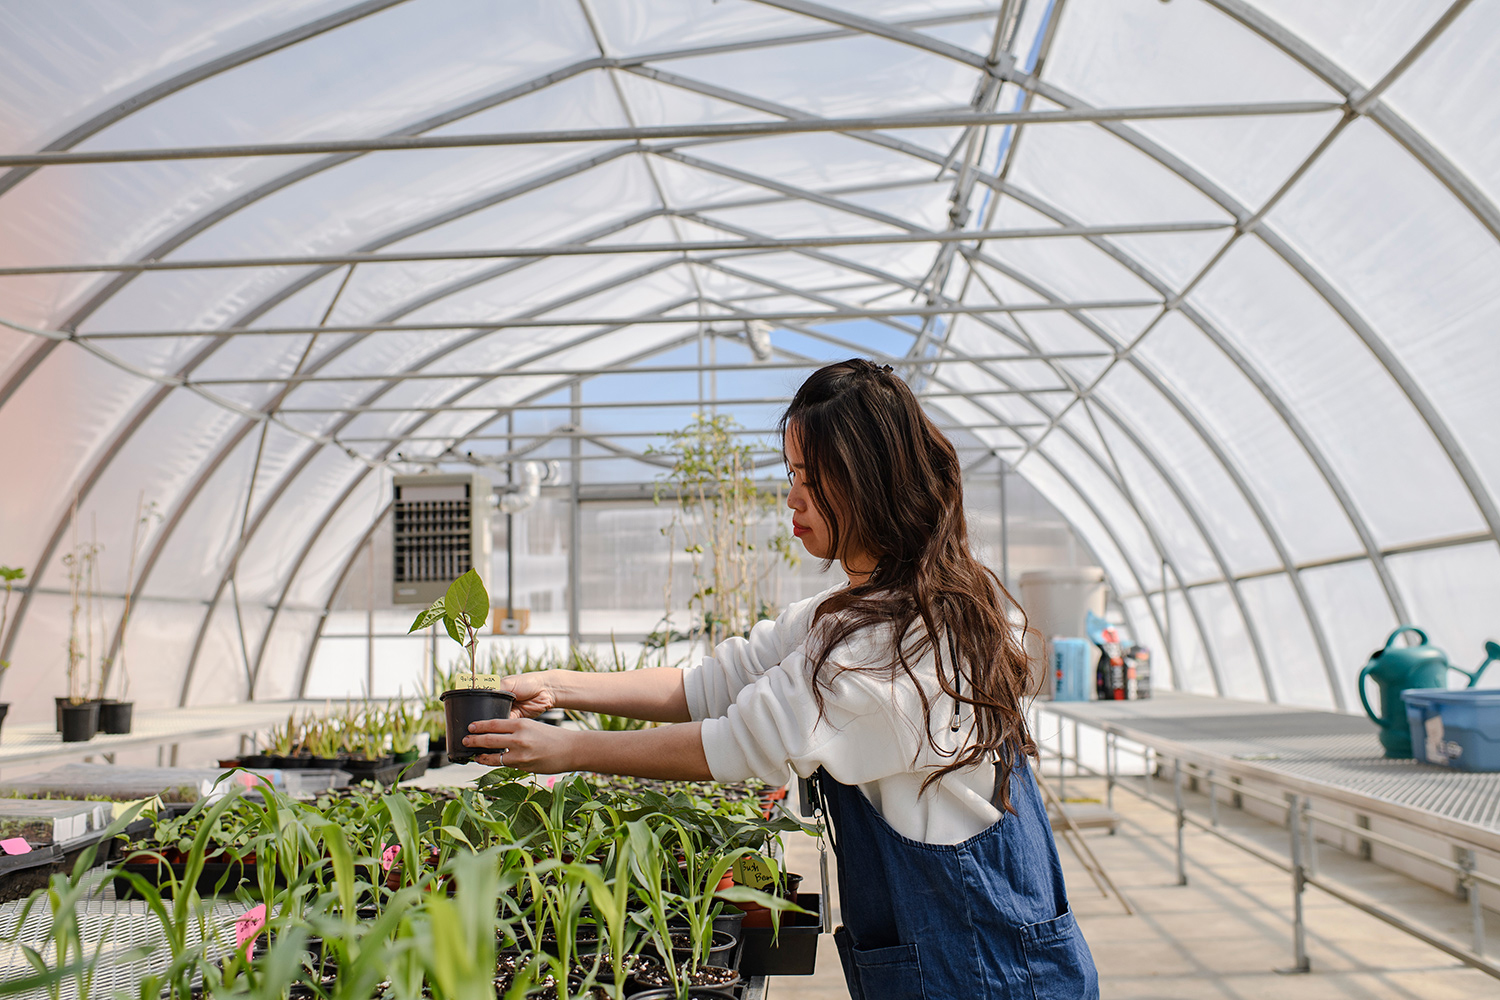 A woman in denim overalls prepares seedlings inside the farm's greenhouse